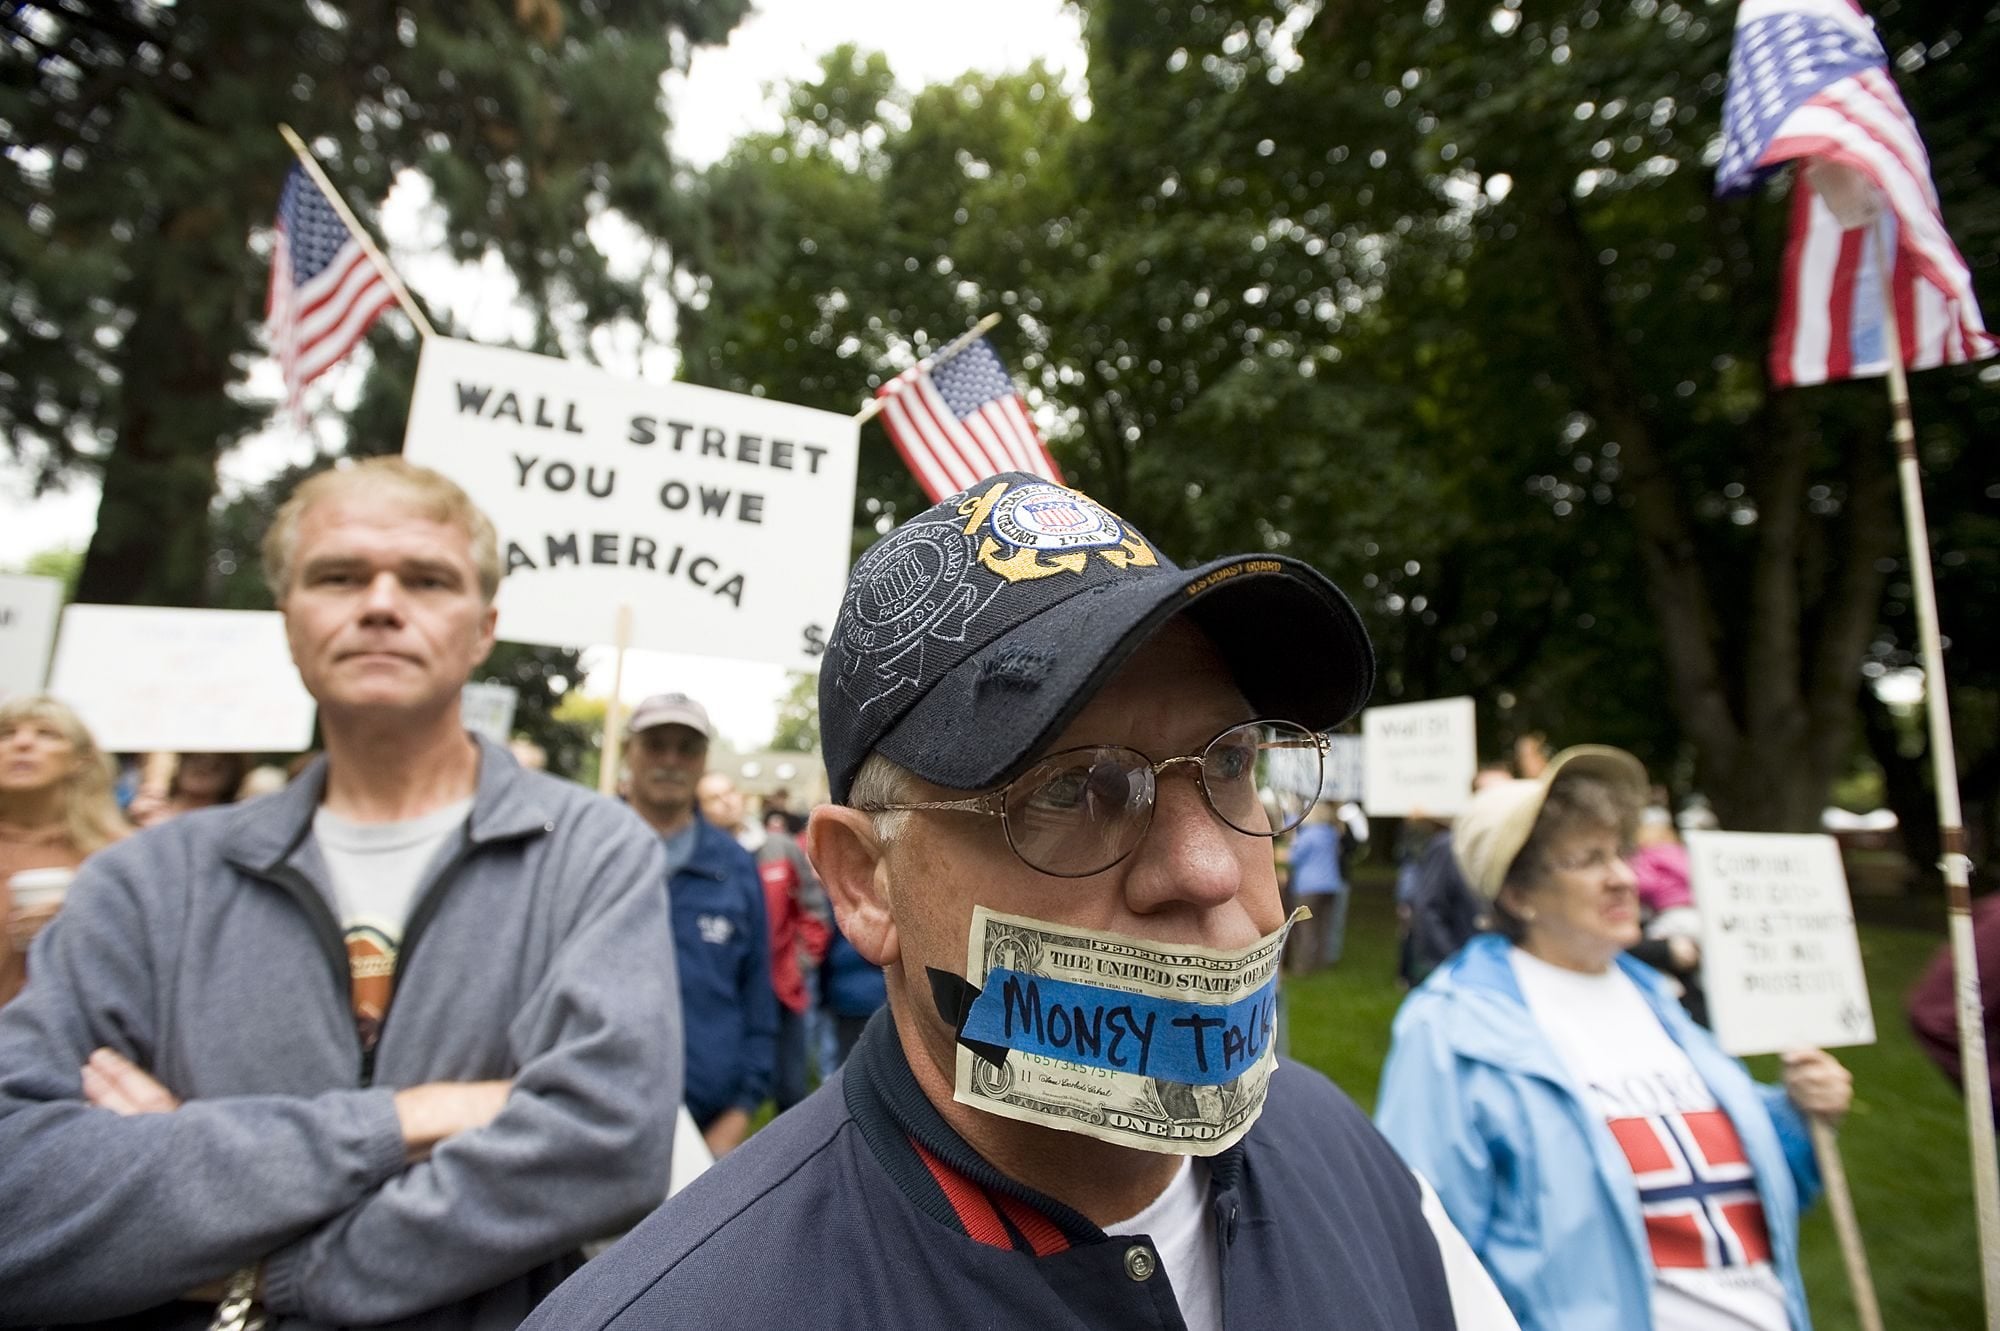 Vancouver resident Craig Murphy wore a symbolic muzzle Saturday to protest corporate power over politics.